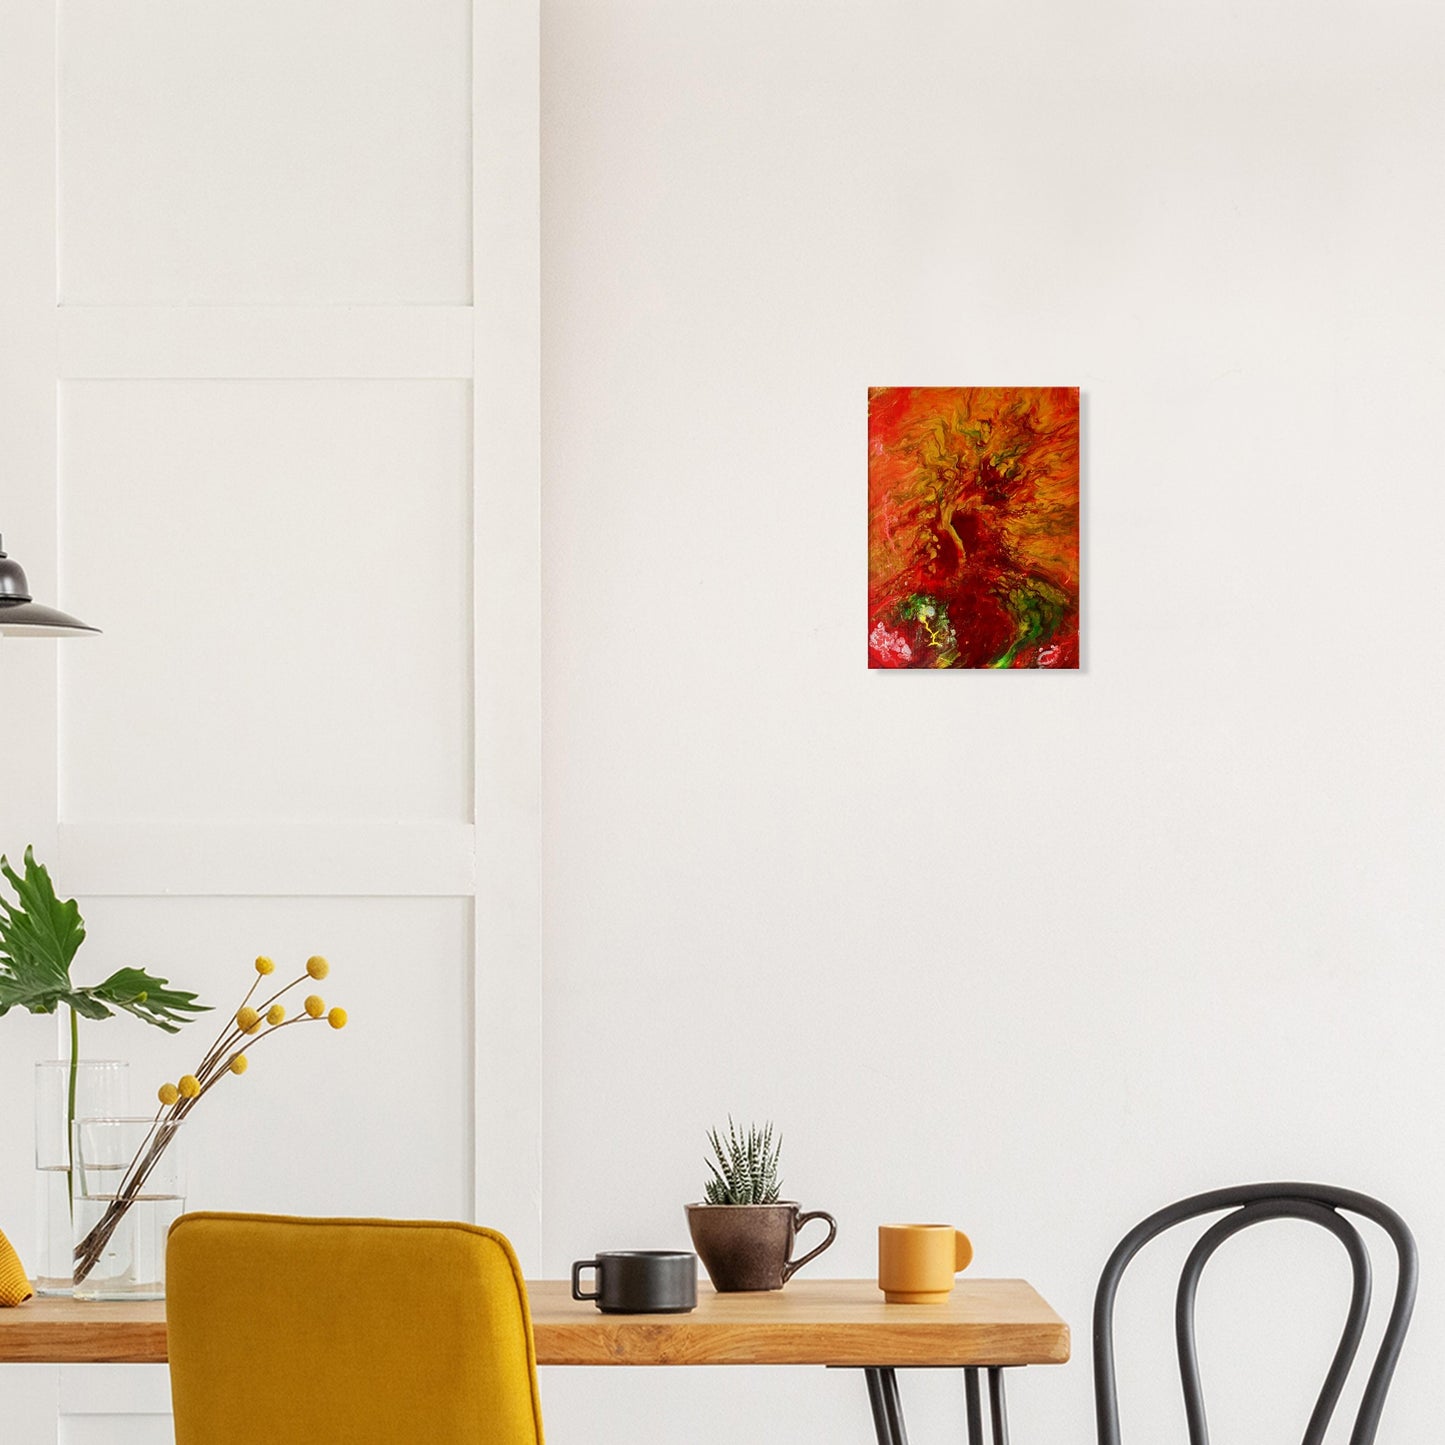 Yana Virtuoso's 'The Tree of Life' canvas print on display, enhancing the living room ambiance with its vivid, life-affirming colors.